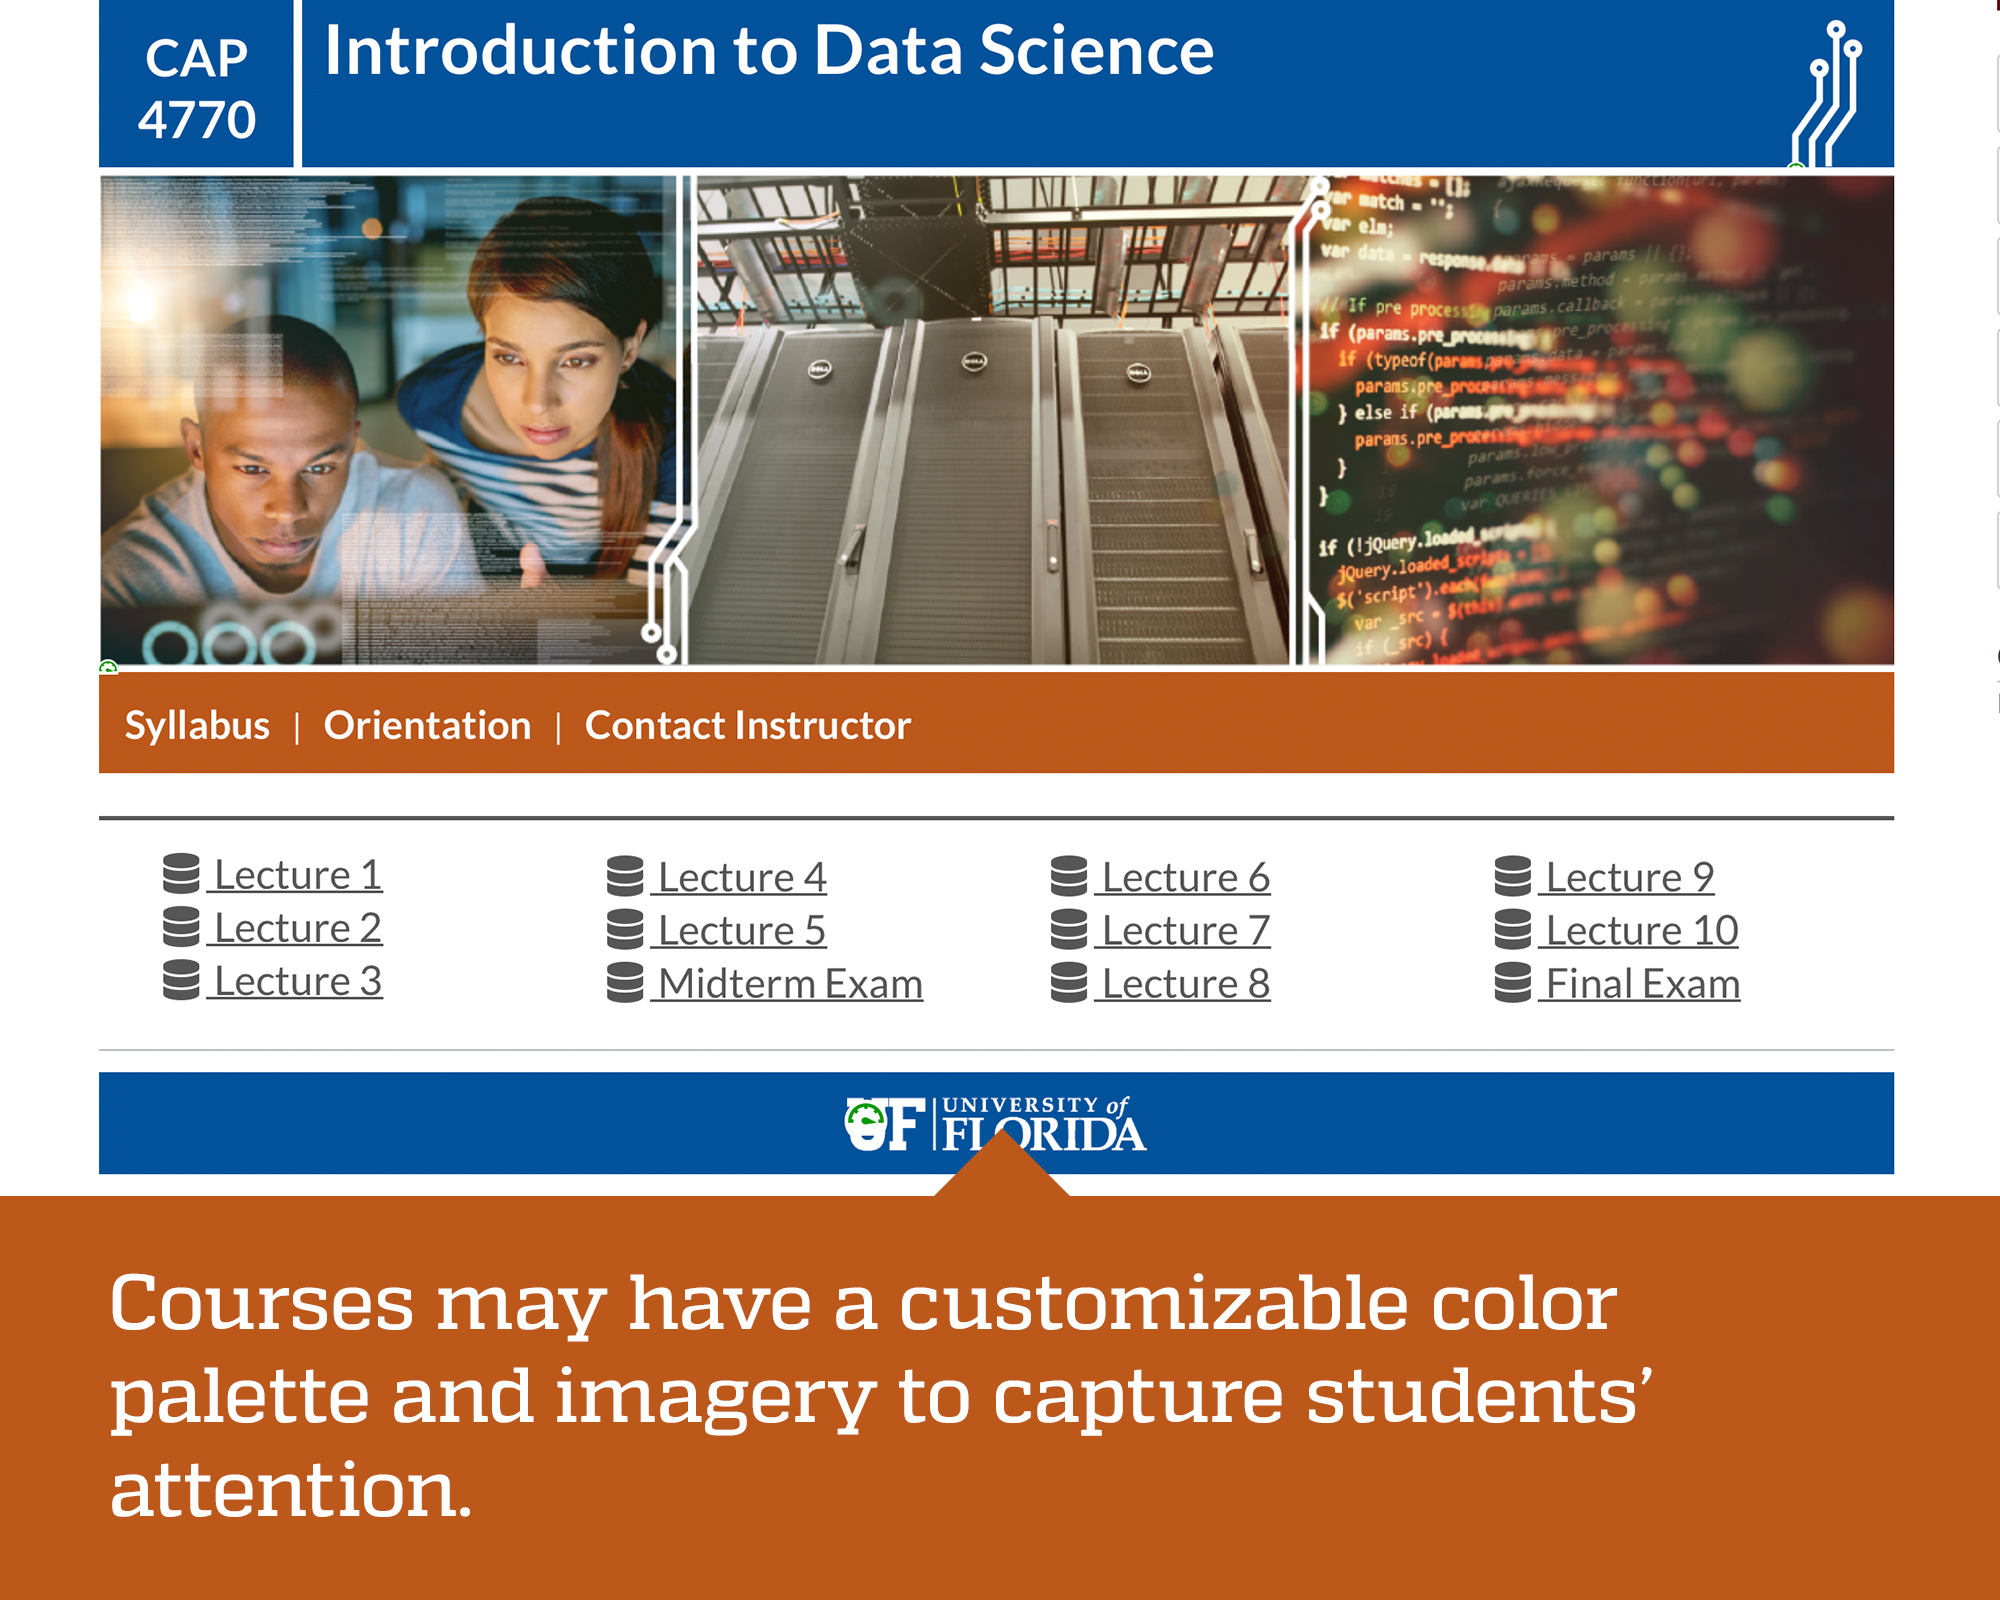 Course home page designed by Center for Online Innovation and Production at University of Florida